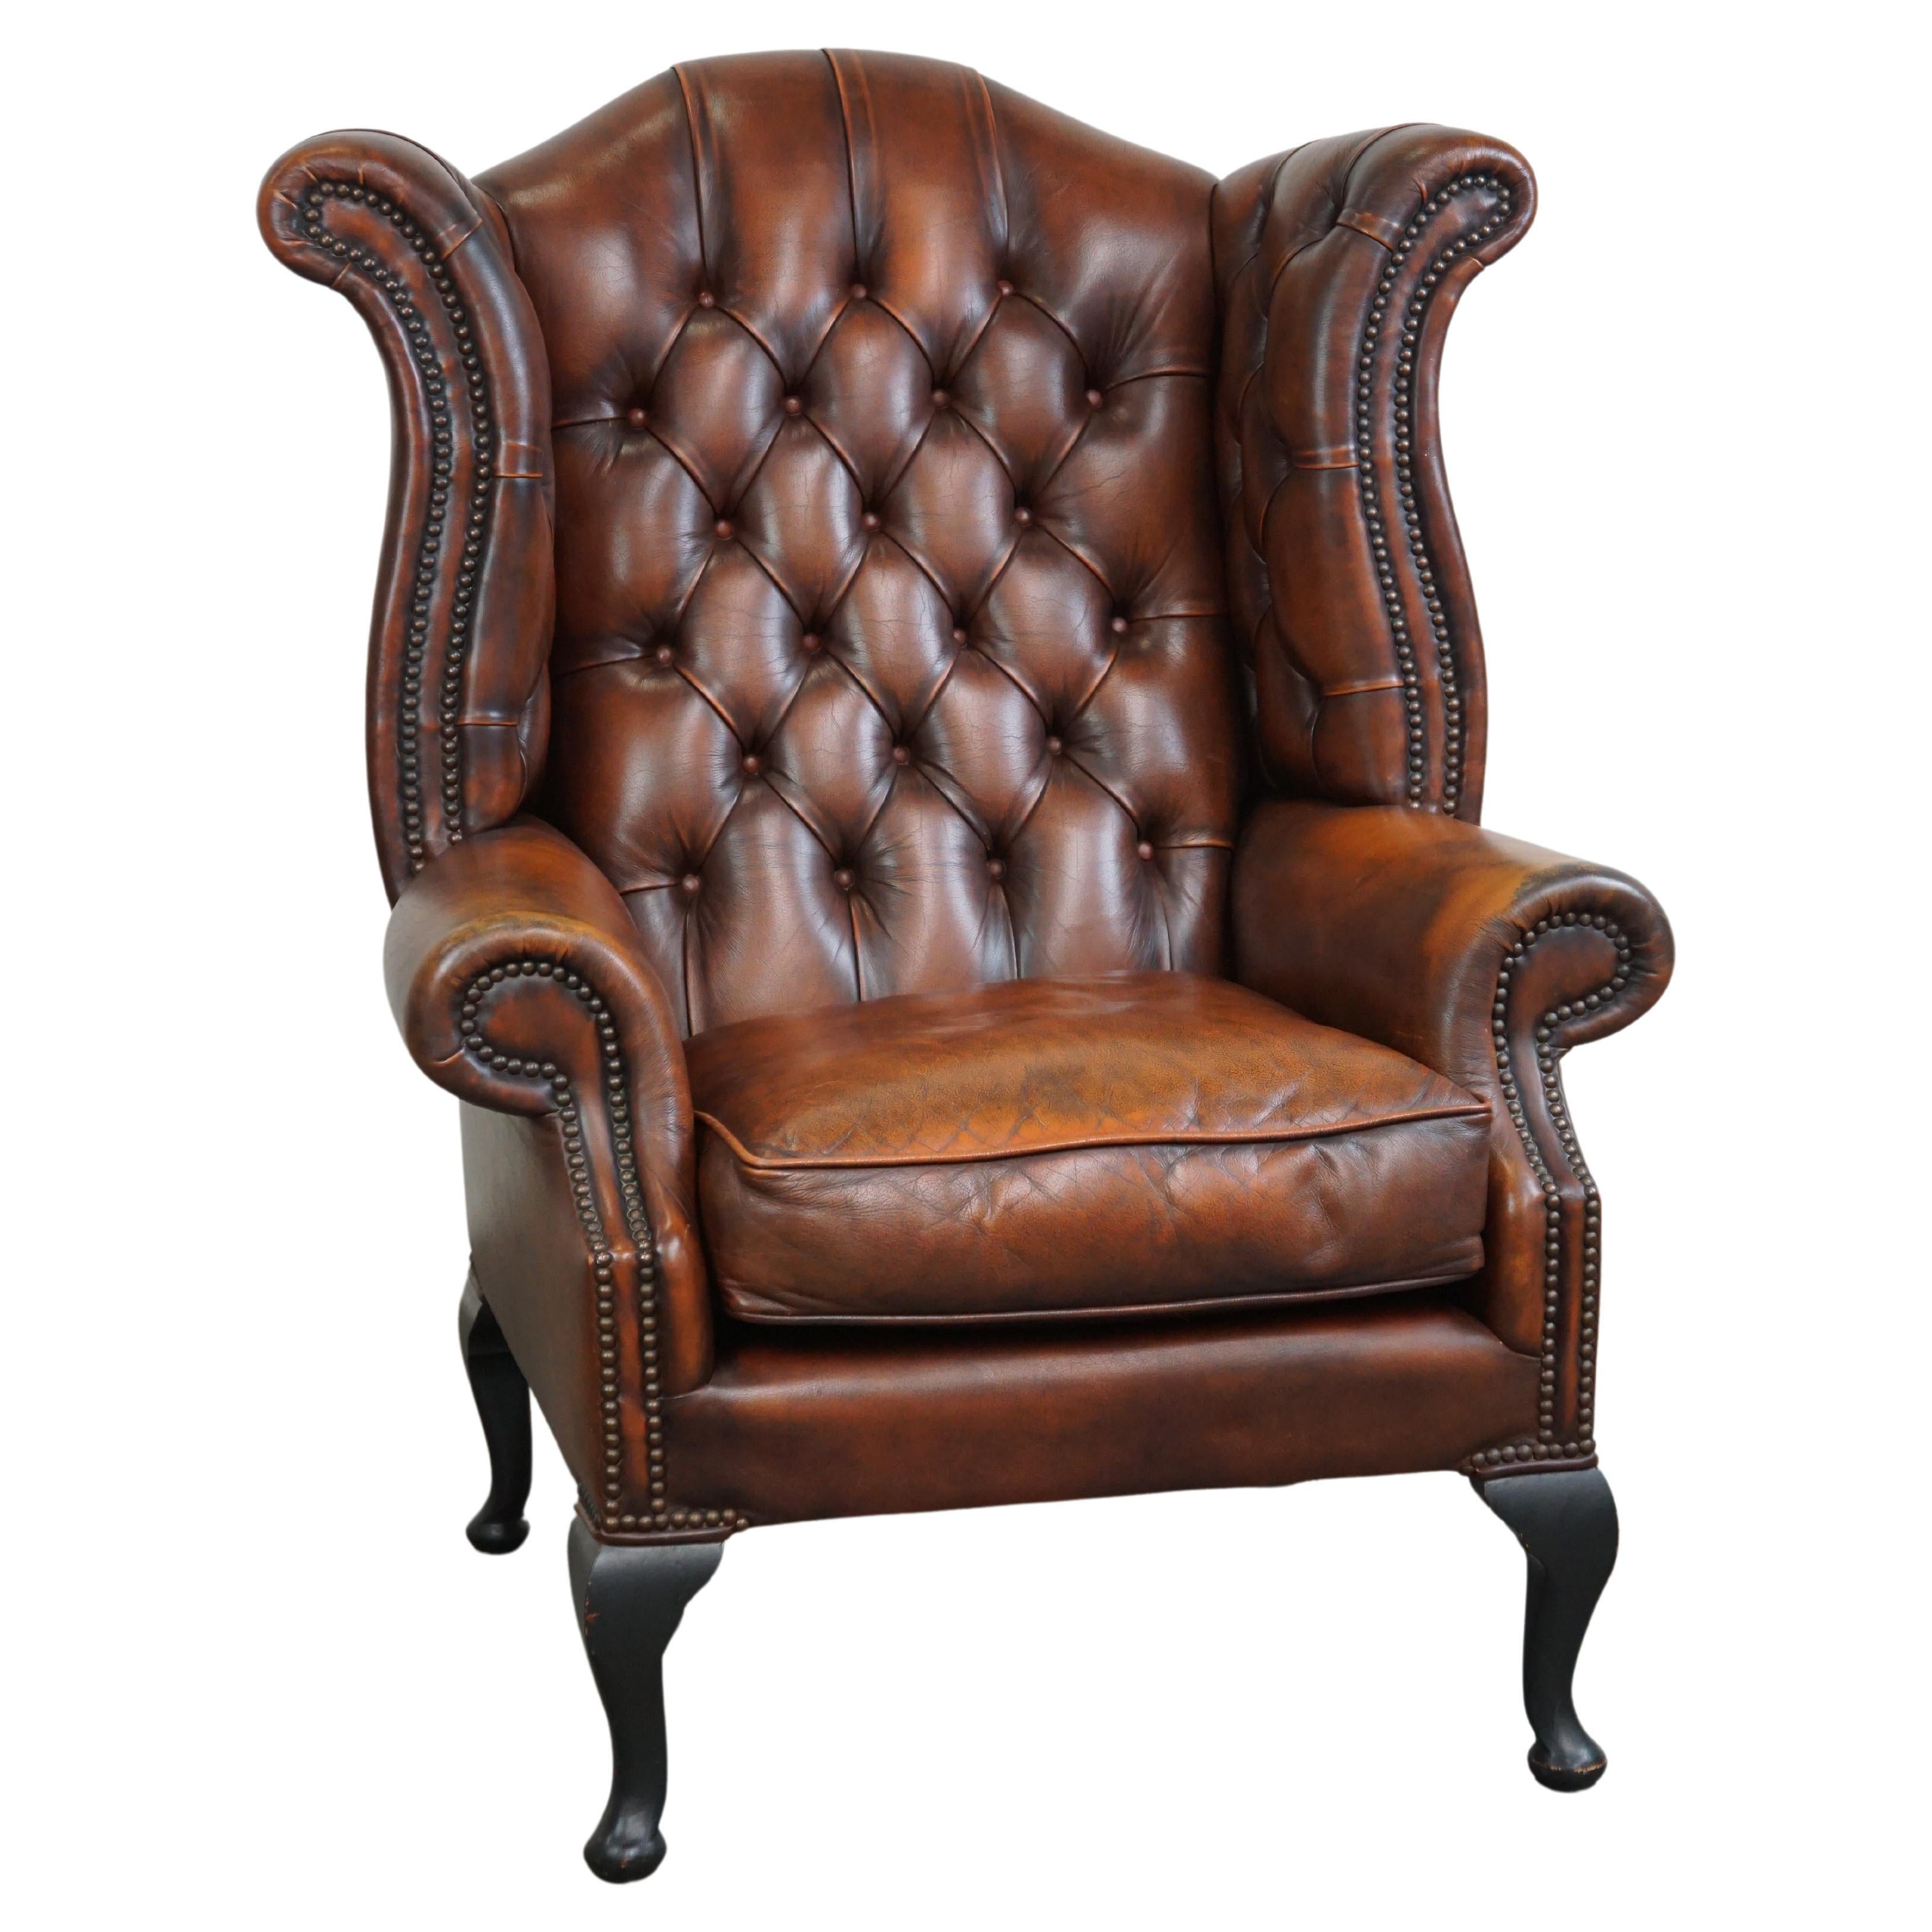 Timeless cognac-colored English cowhide Chesterfield wingback armchair in good c